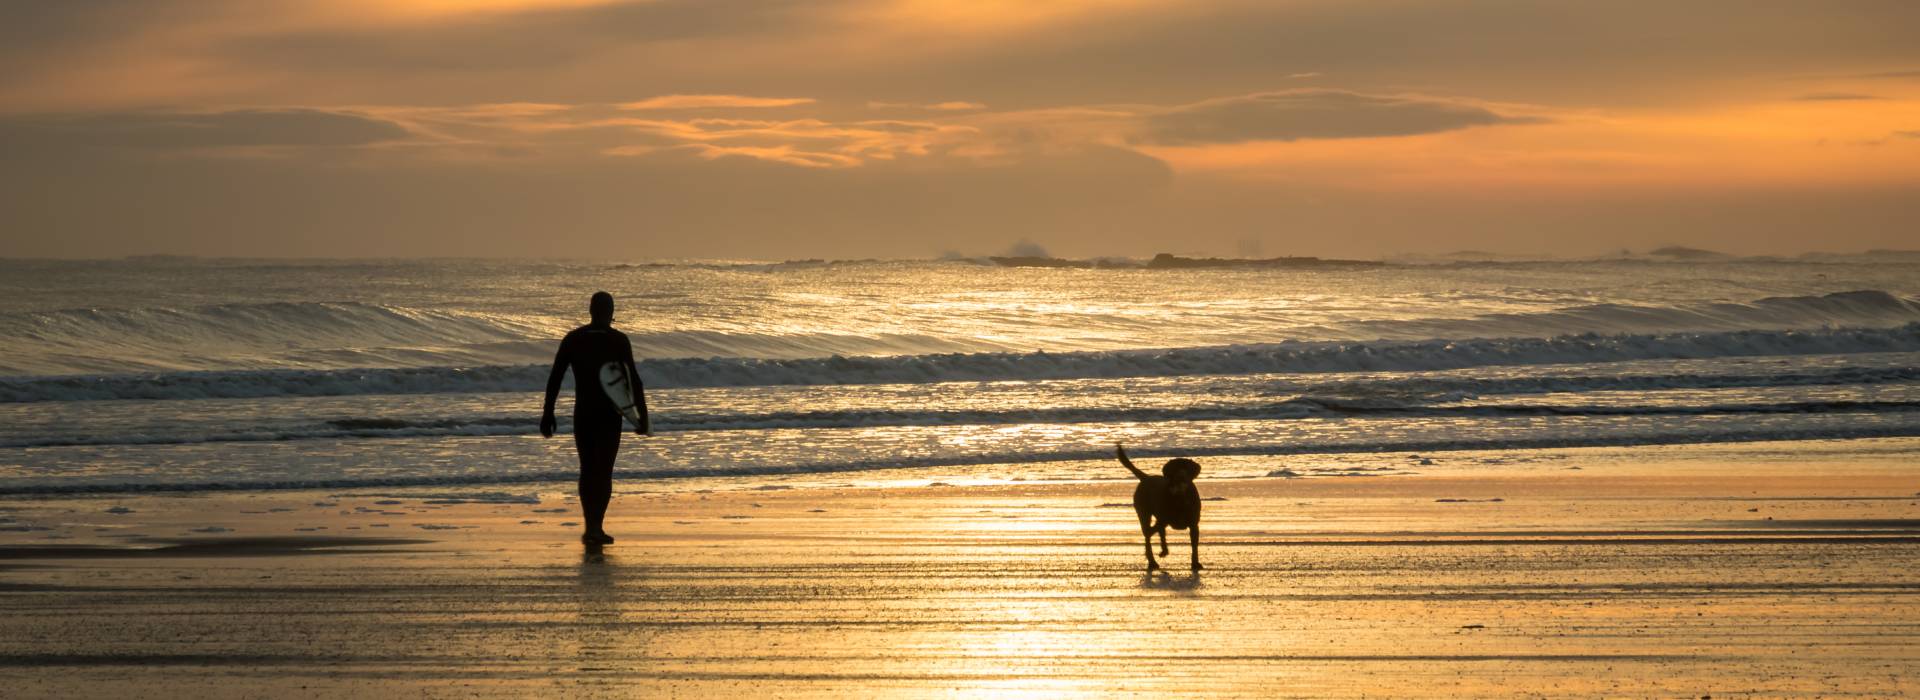 Surfer on beach with dog